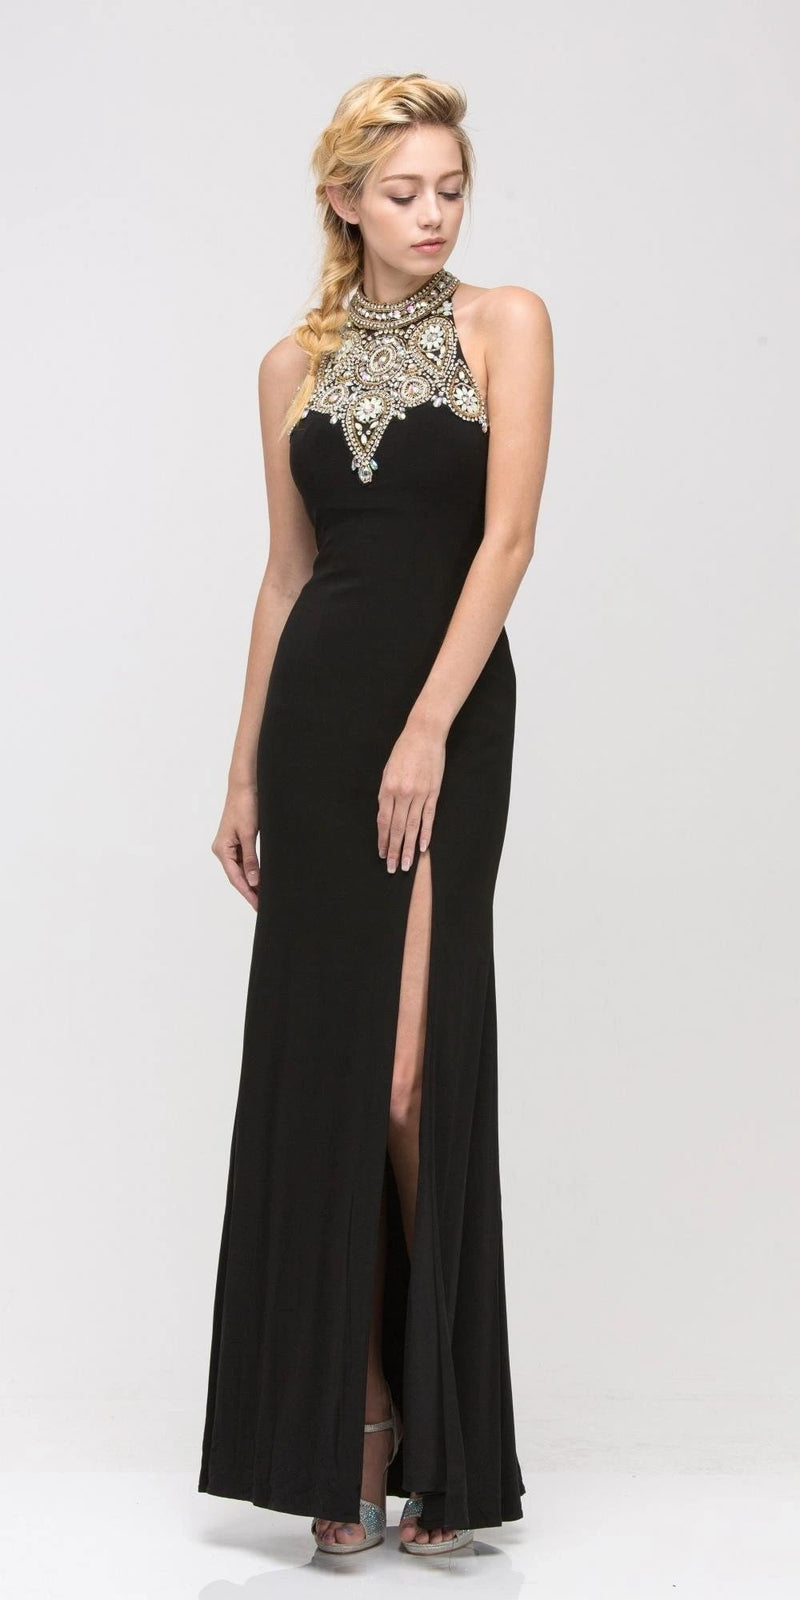 Gown in Black with Front Slit and Aztec Bead Design